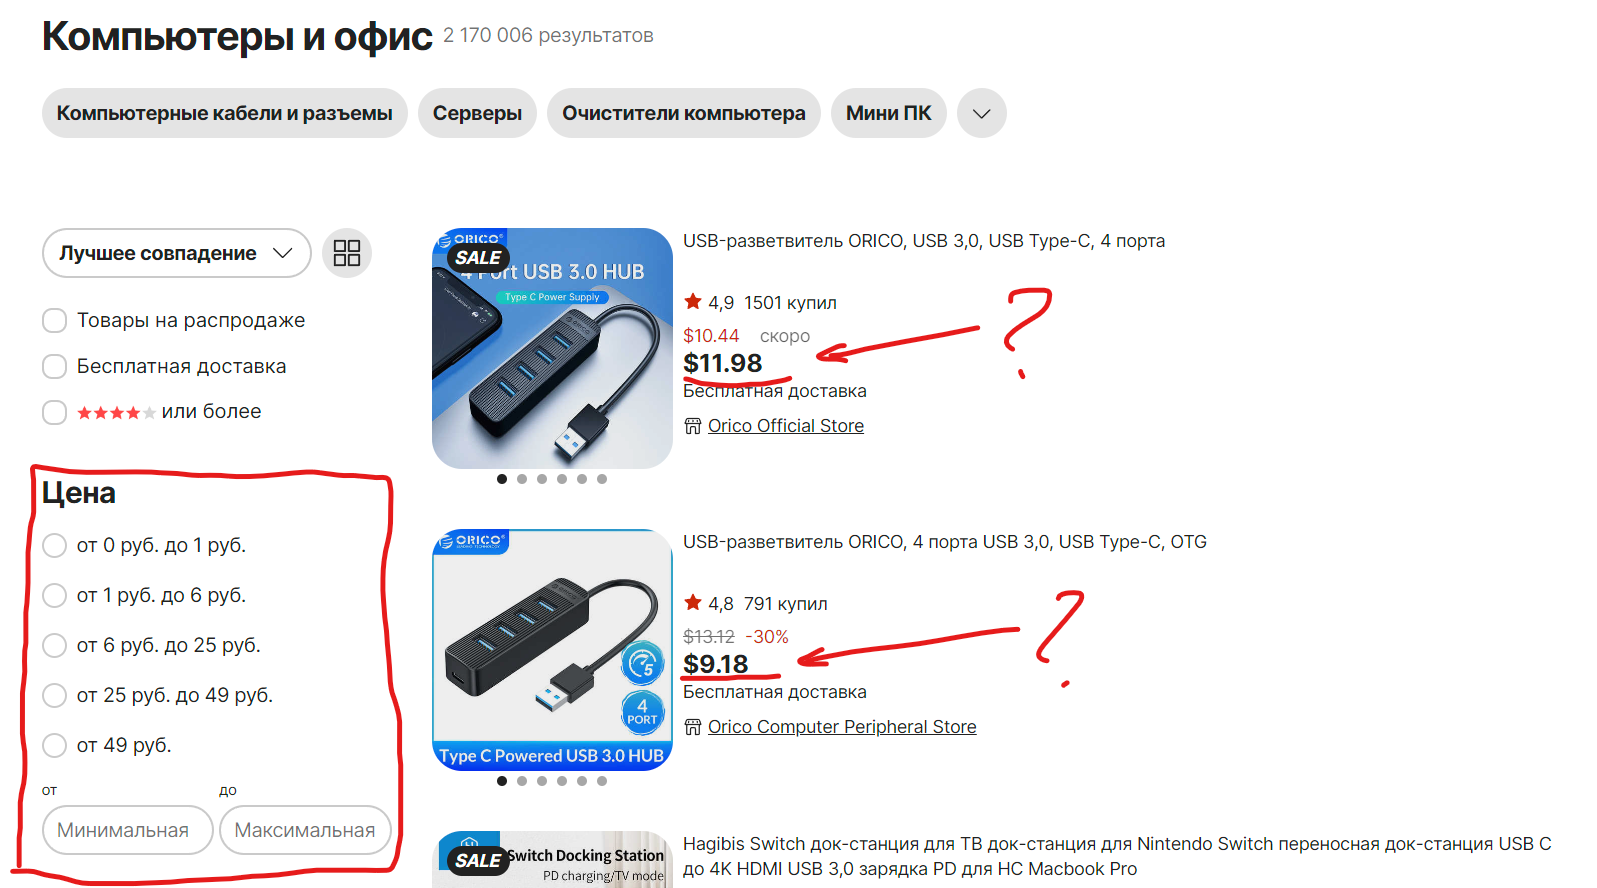 Aliexpress RU, what is wrong with you? - My, AliExpress, Delivery, Fraud, Cheating clients, Republic of Belarus